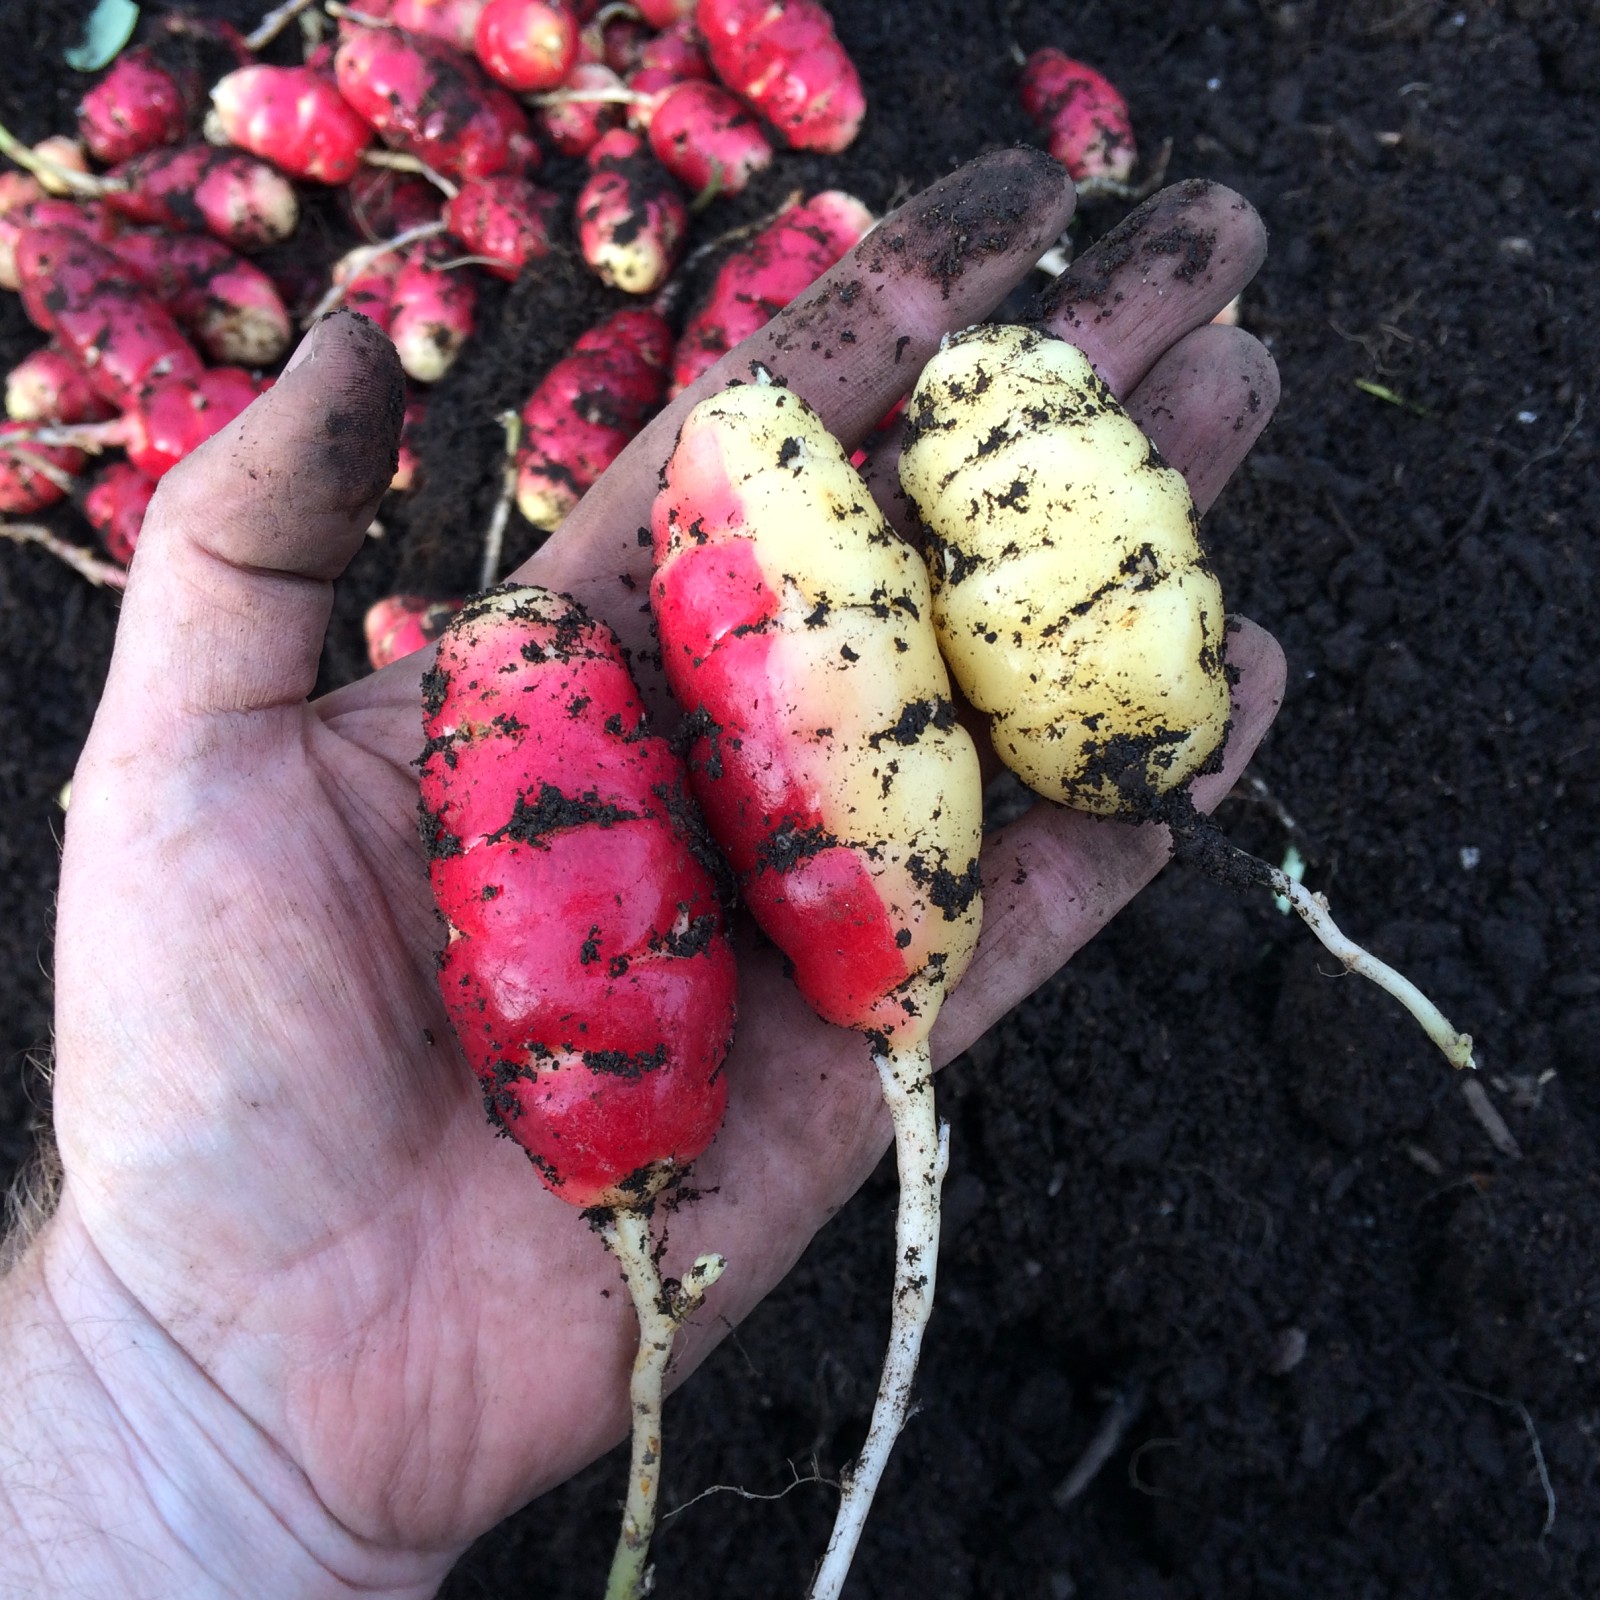 Yacon, wonder tuber from the Andes - almost no calories and does